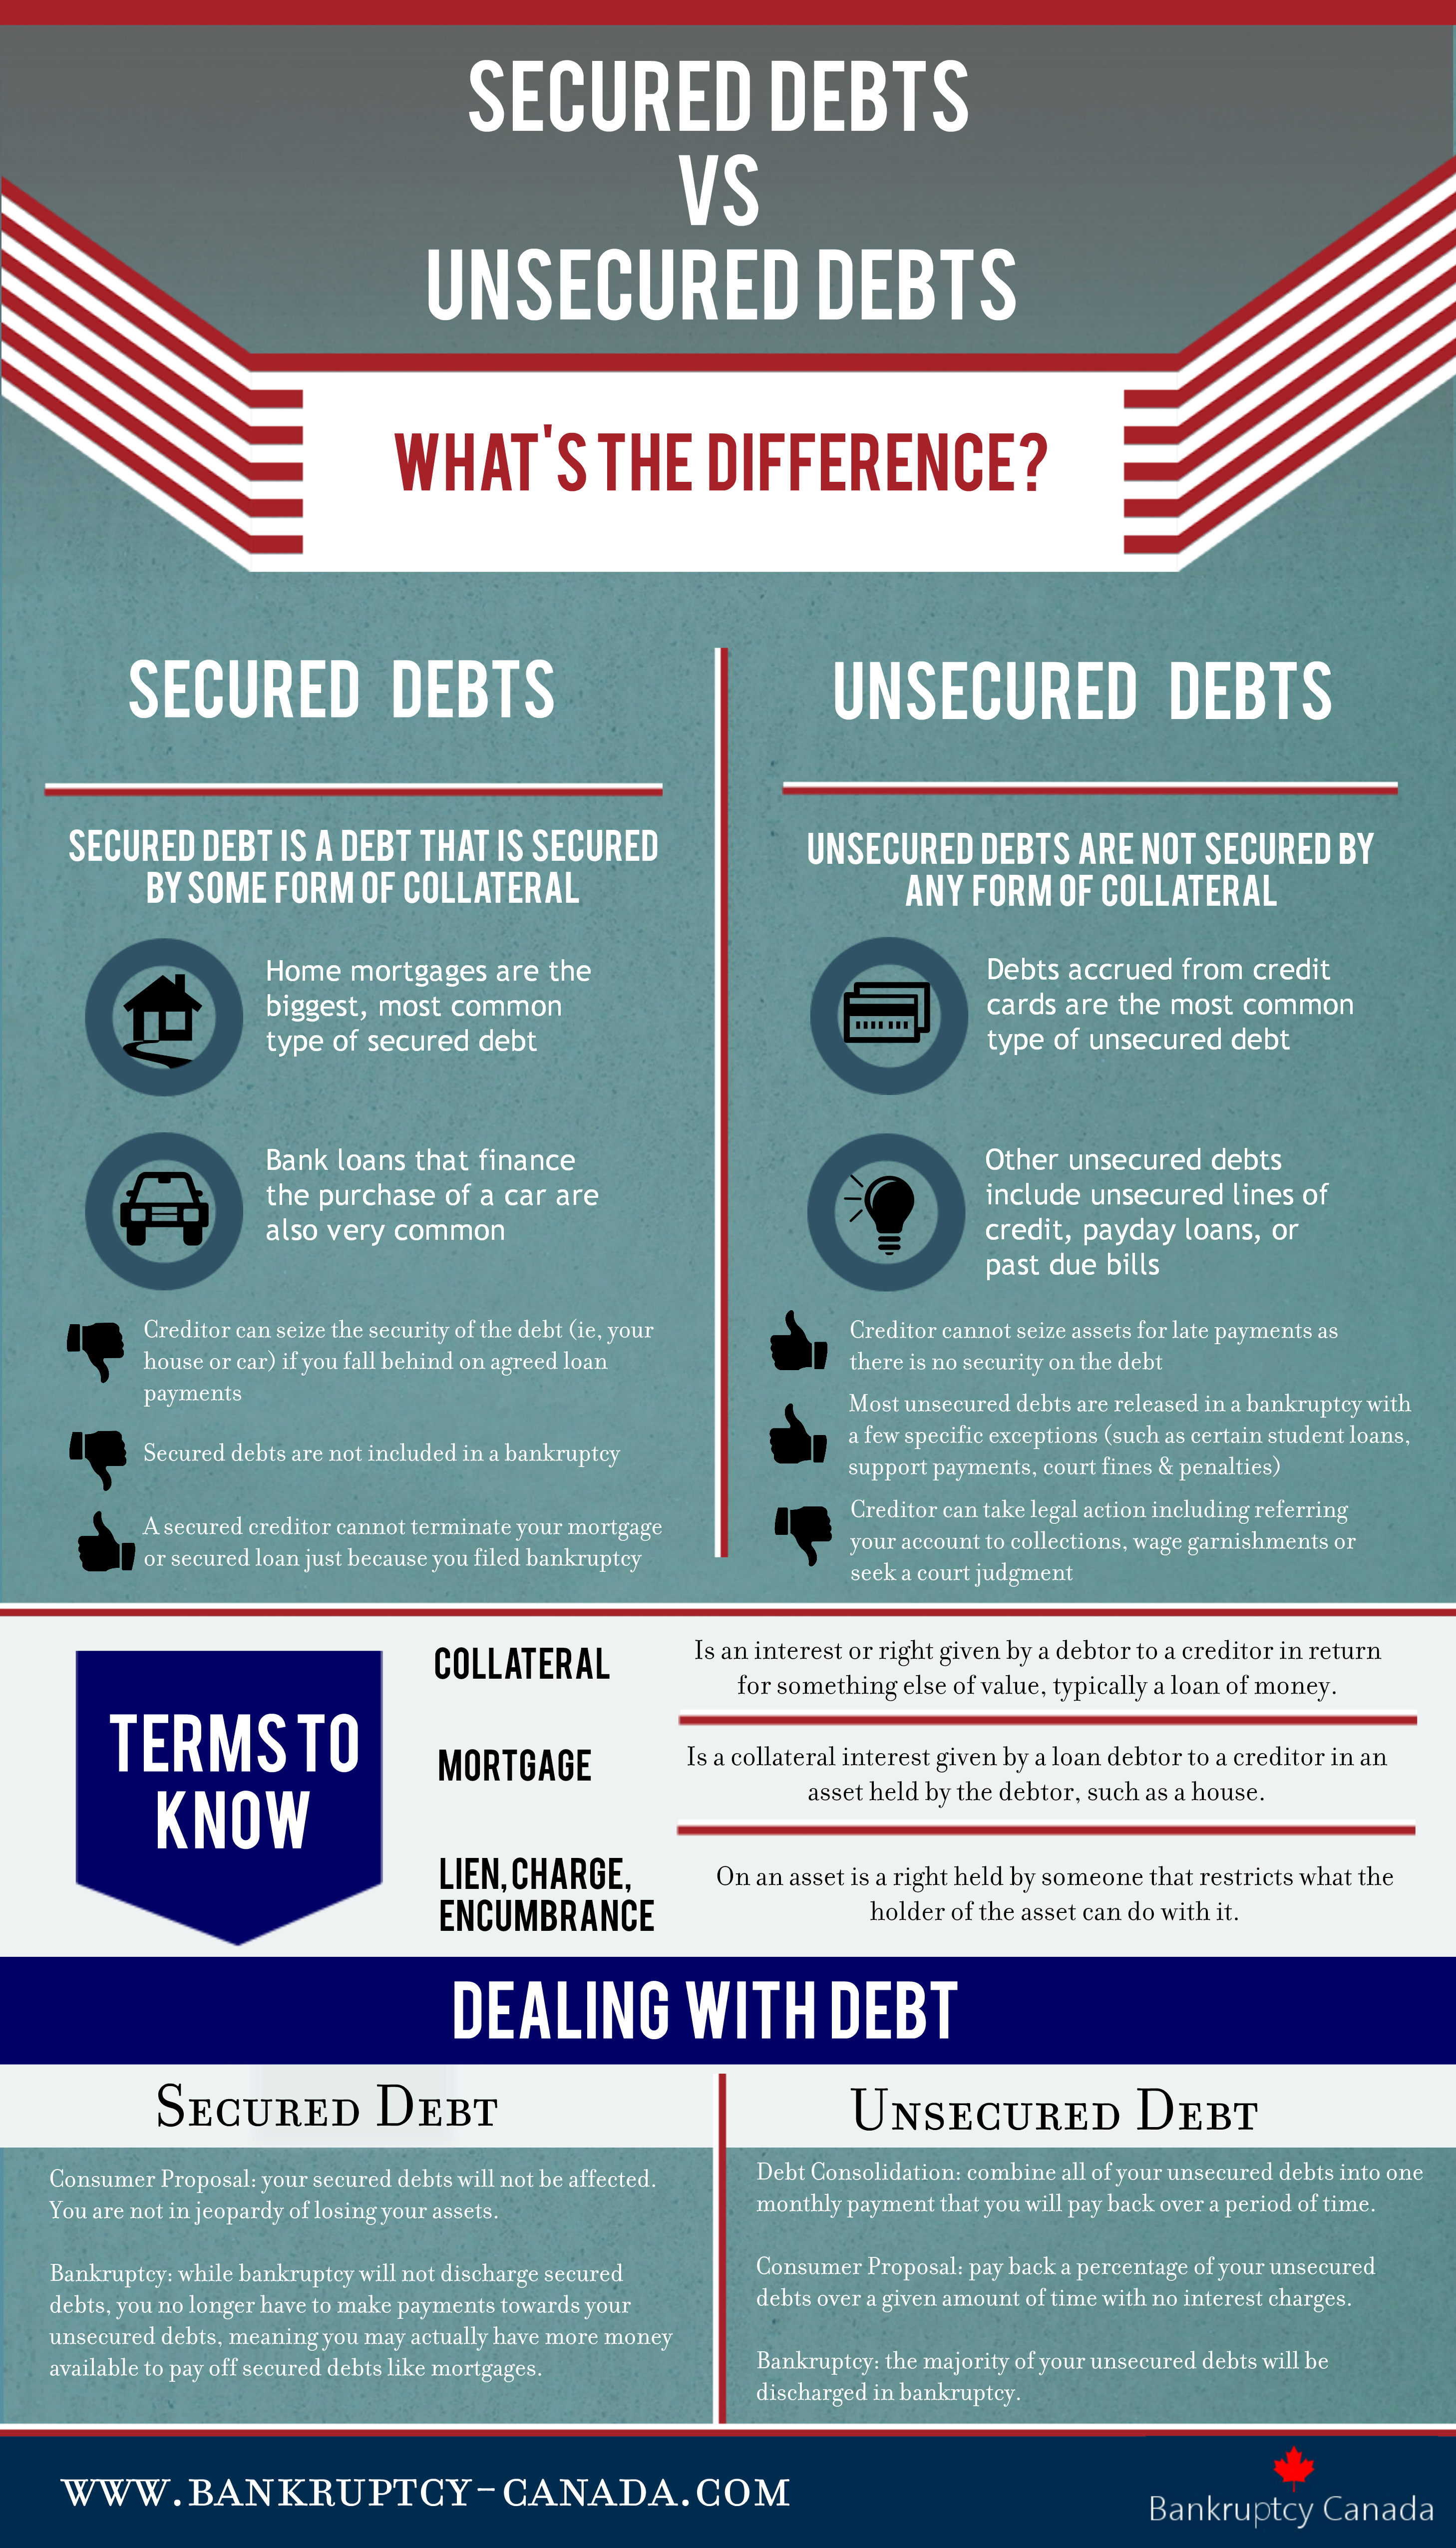 secured and unsecured debt in bankruptcy in Canada